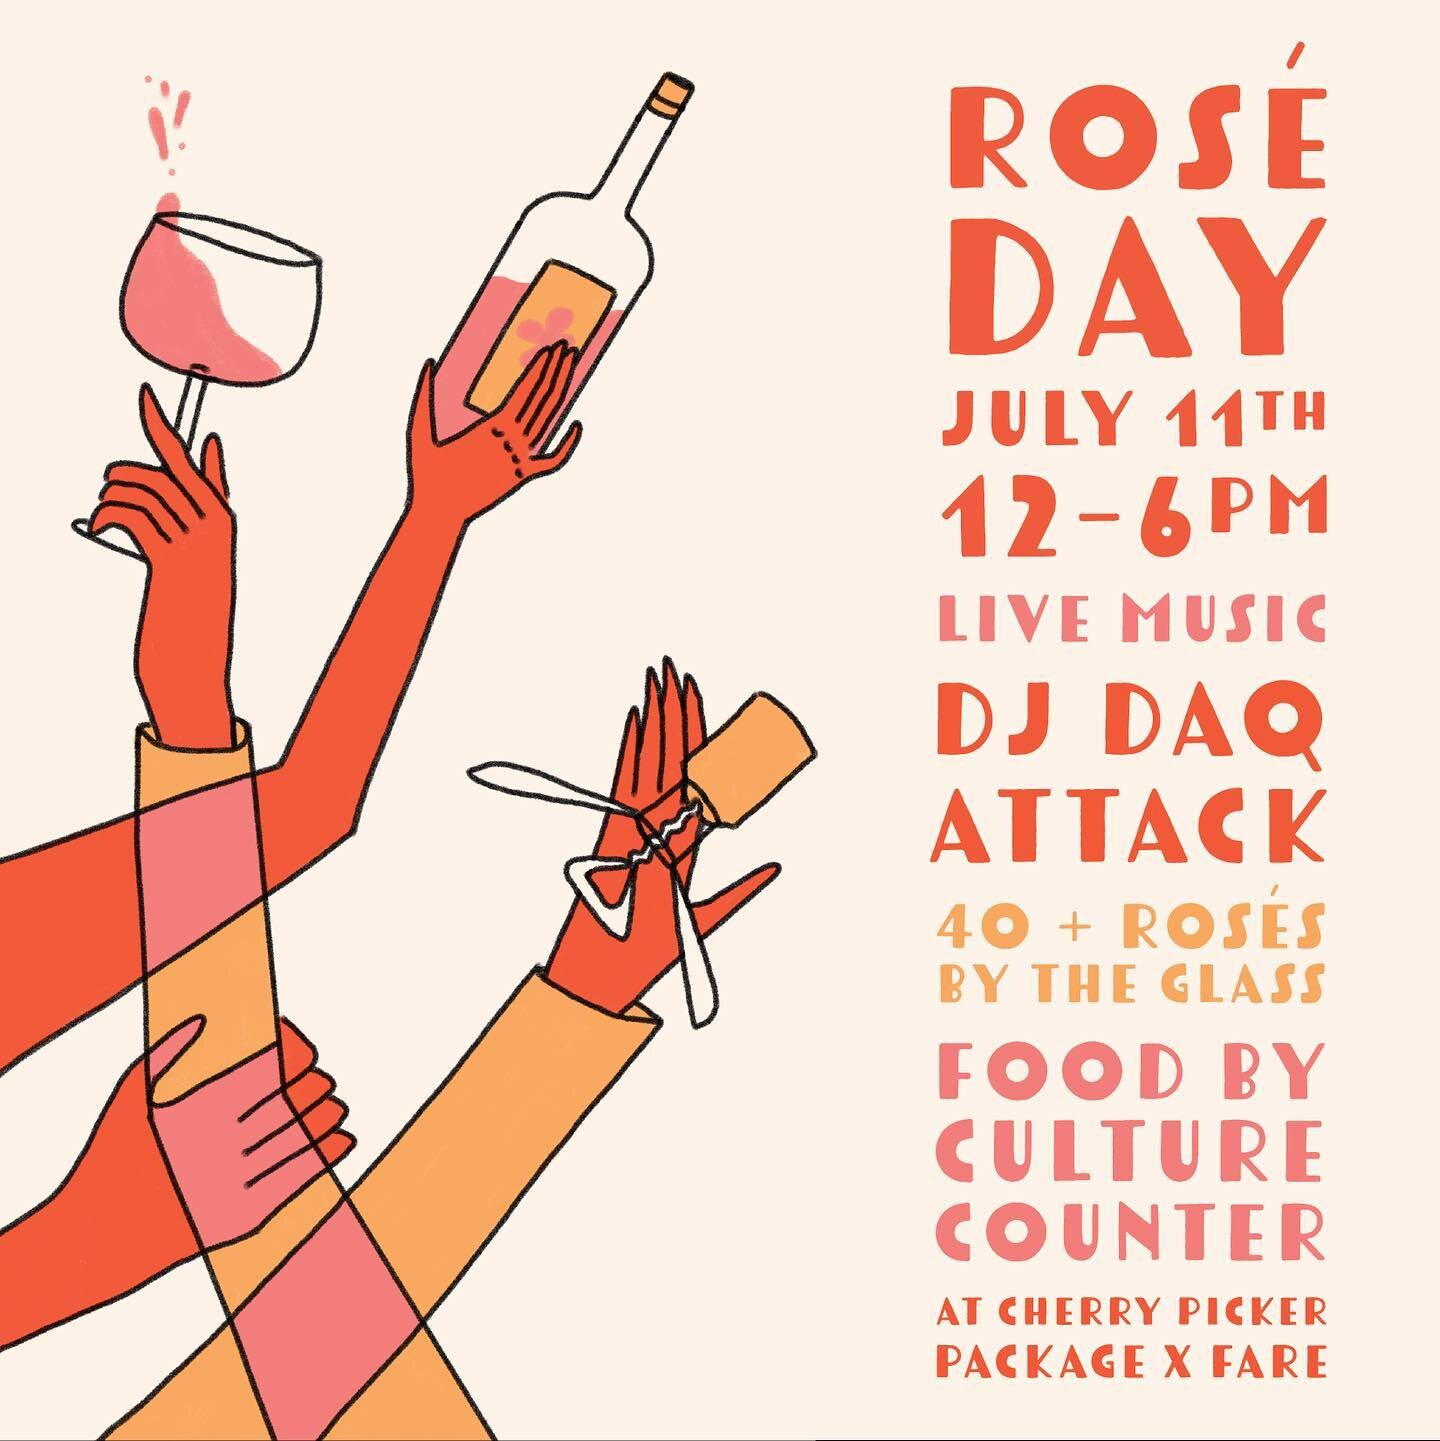 Join us THIS SUNDAY from 12pm to 6pm for a day full of sun, family fun and Ros&eacute;! 

We'll have 40+ Ros&egrave;'s by the glass,
live music by @djdaqattack , and delicious grub by our neighbors @culture_countersgf ! 

We sure missed this event in